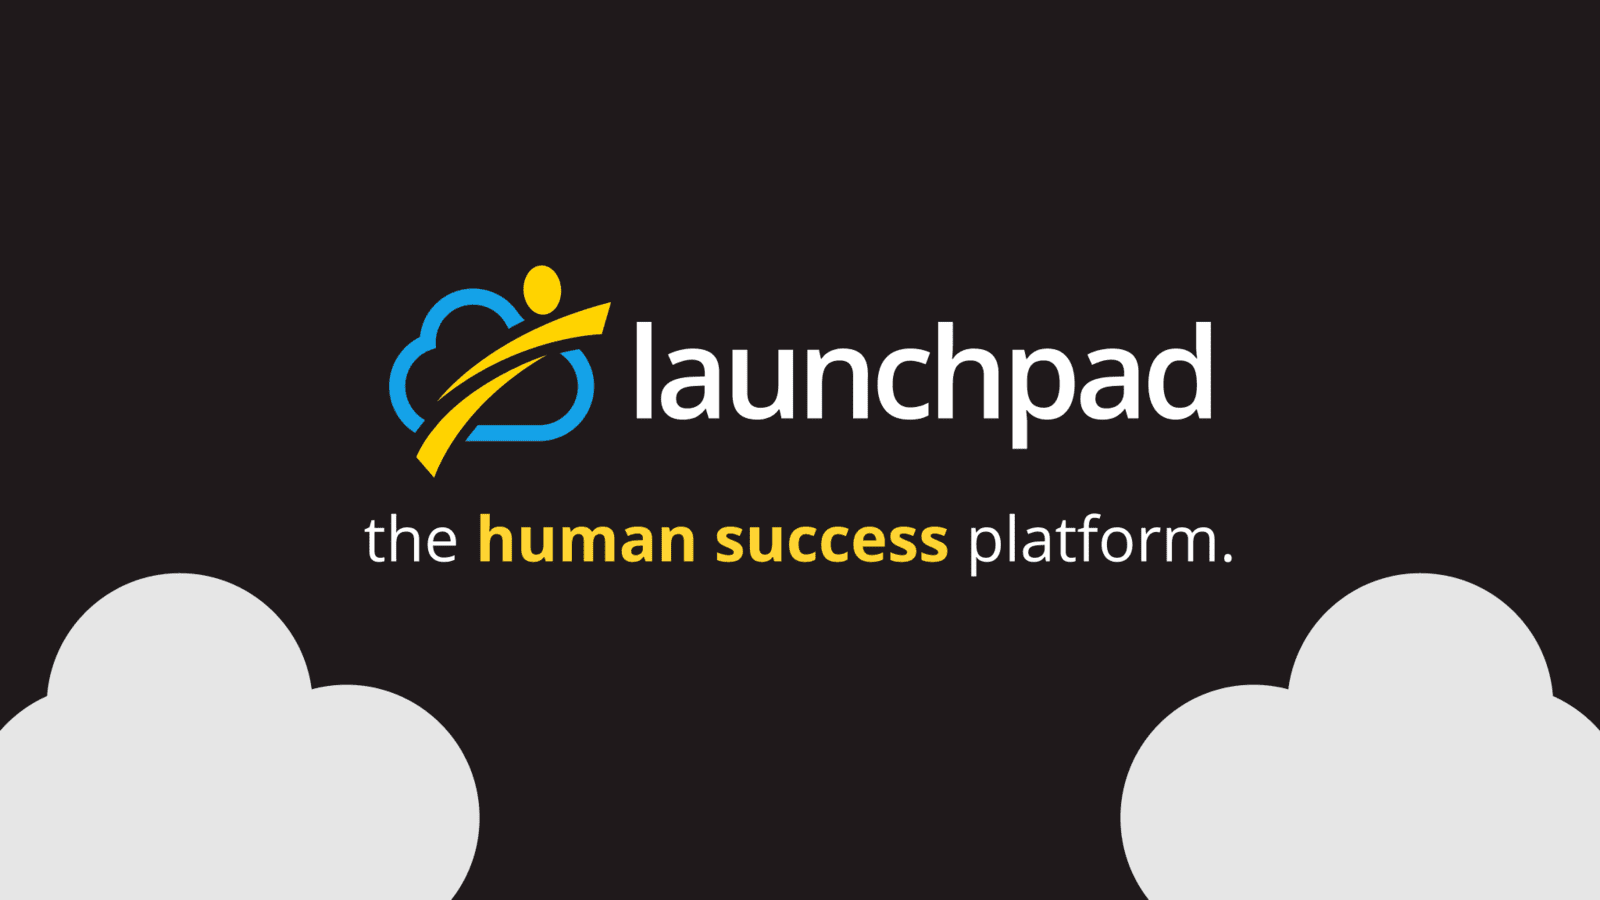 Who is Launchpad?